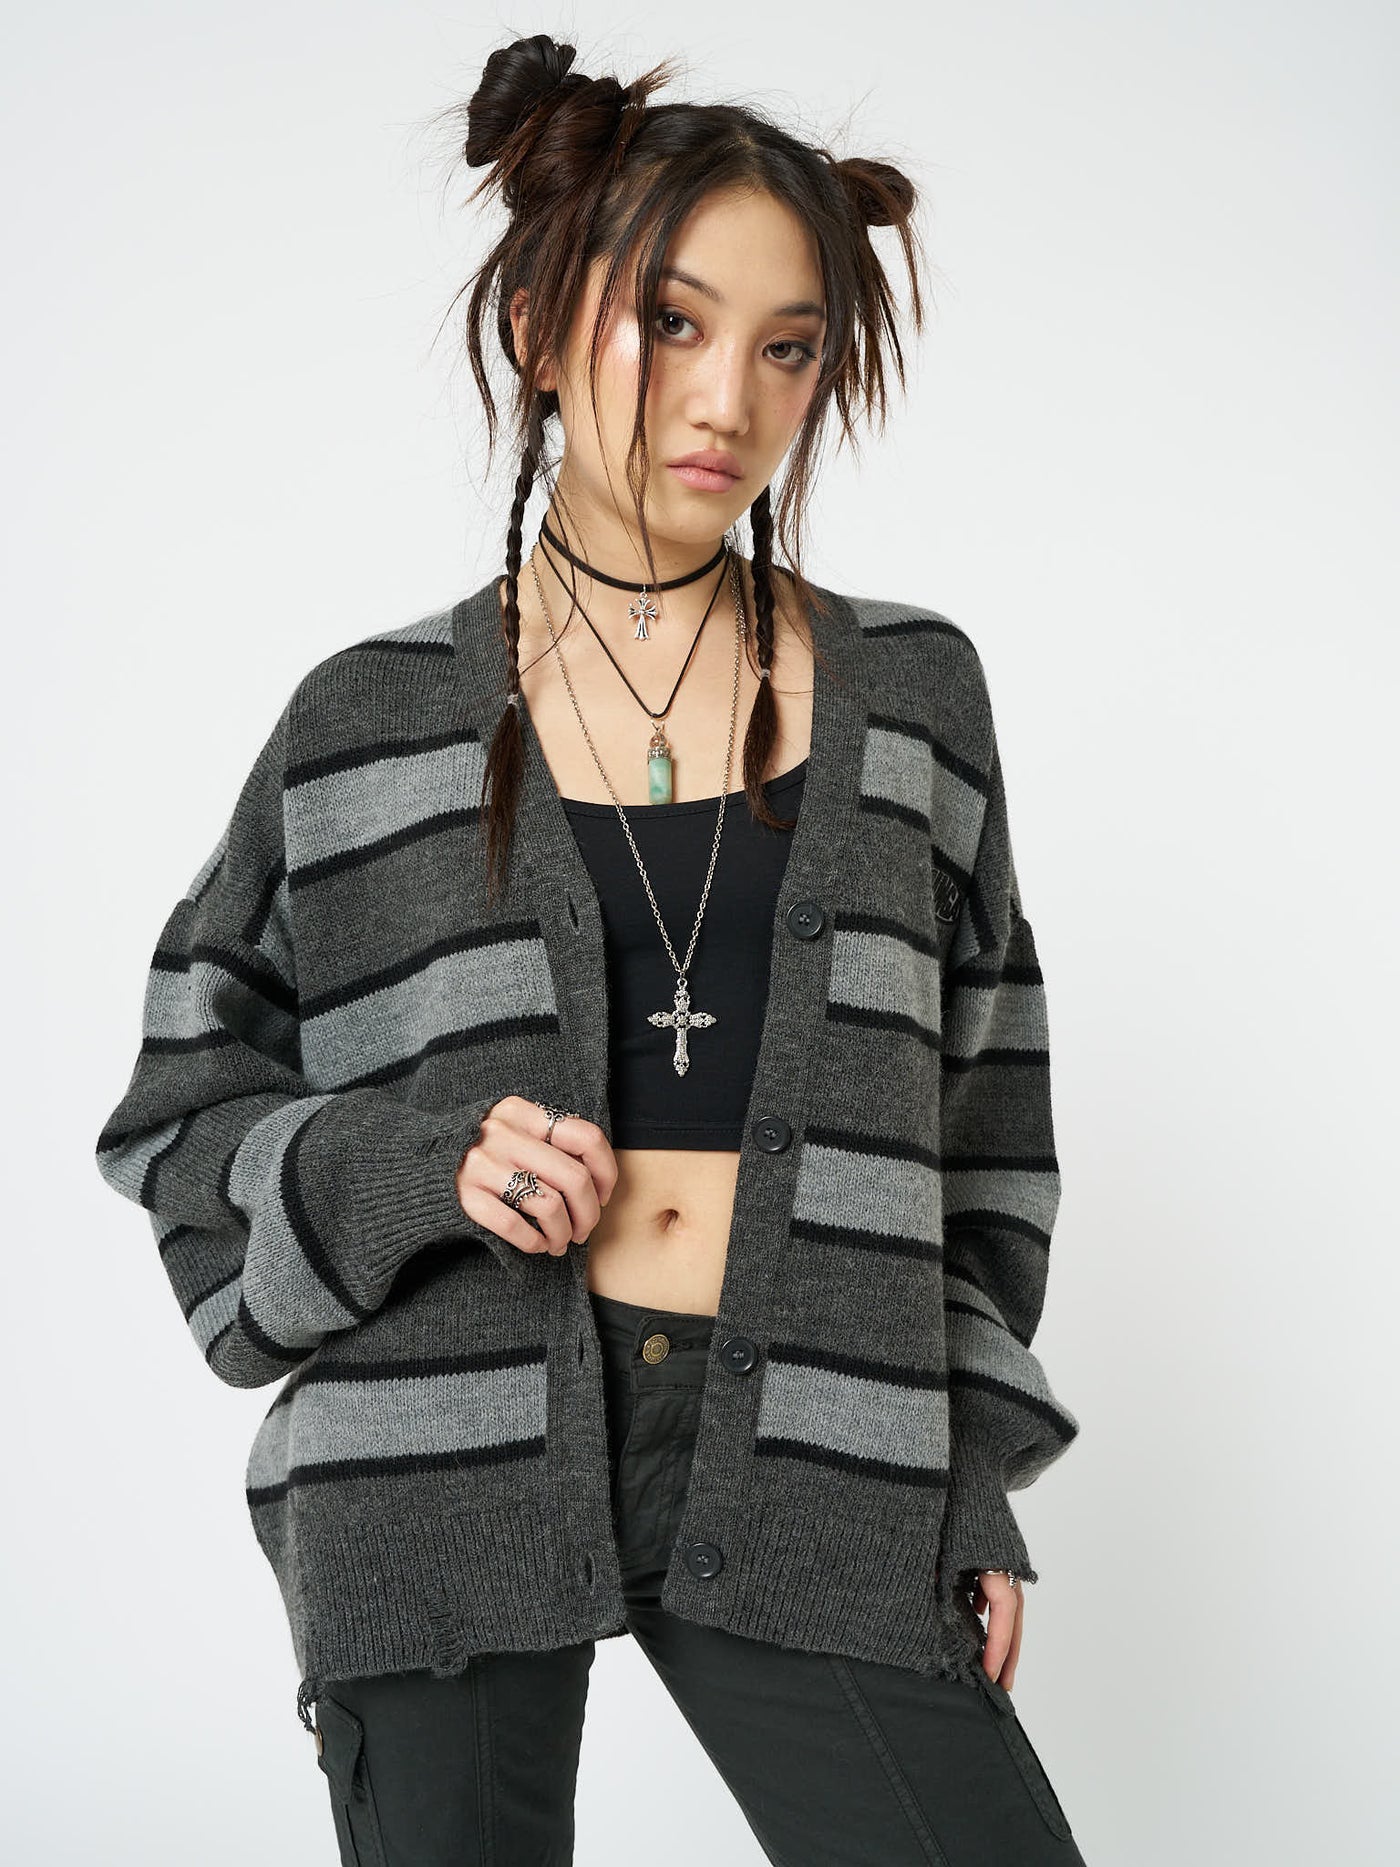 Knit cardigan named Neesa by Minga London, featuring grey and black stripes for a fashionable and relaxed look, perfect for layering and adding texture to your outfit.